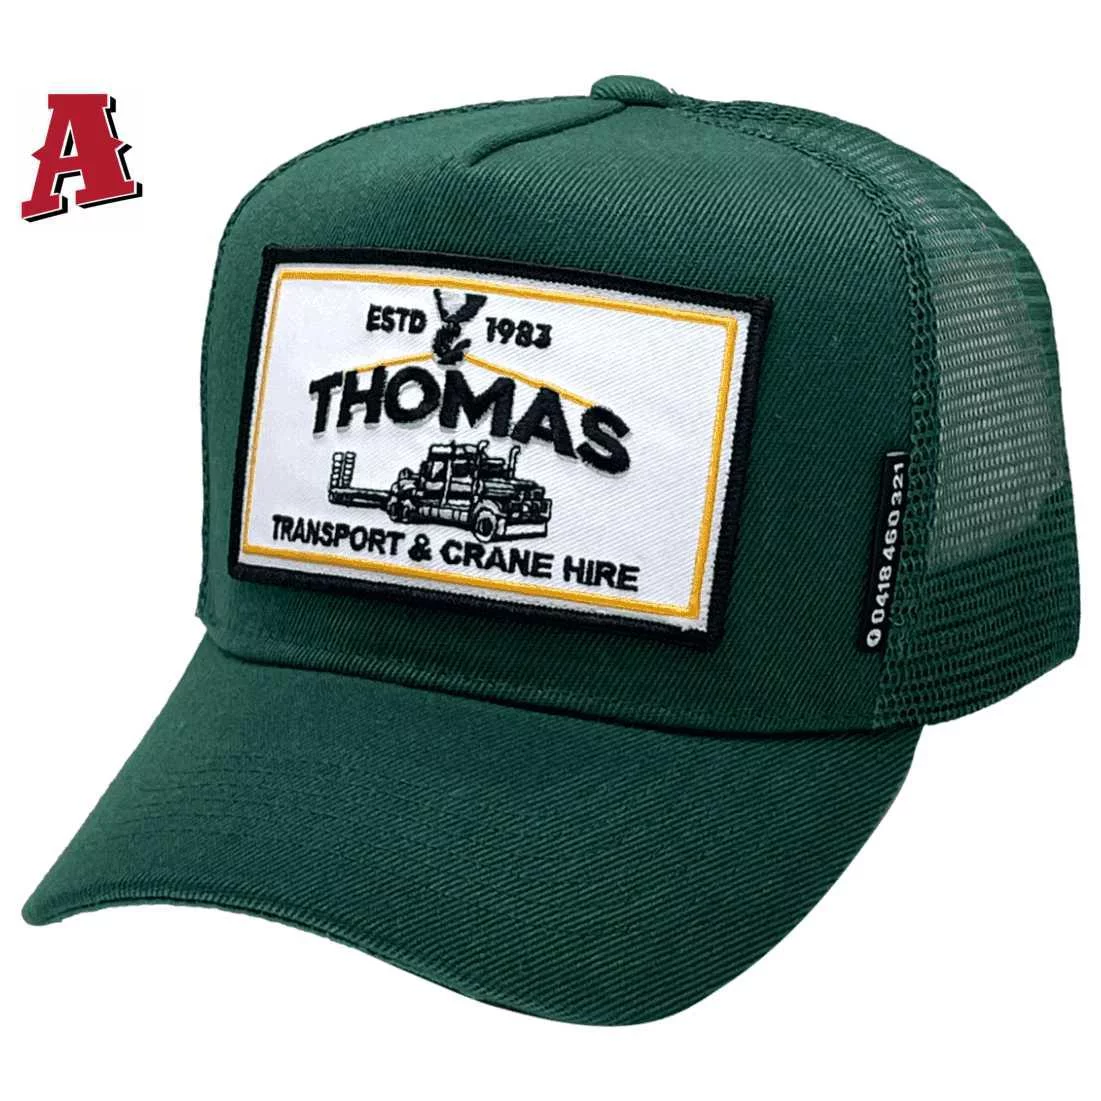 Thomas Transport and Crane Hire Kiels Mountain QLD HP Basic Aussie Trucker hats with Australian Head Fit Crown and Double Side Stripes Bottle Green